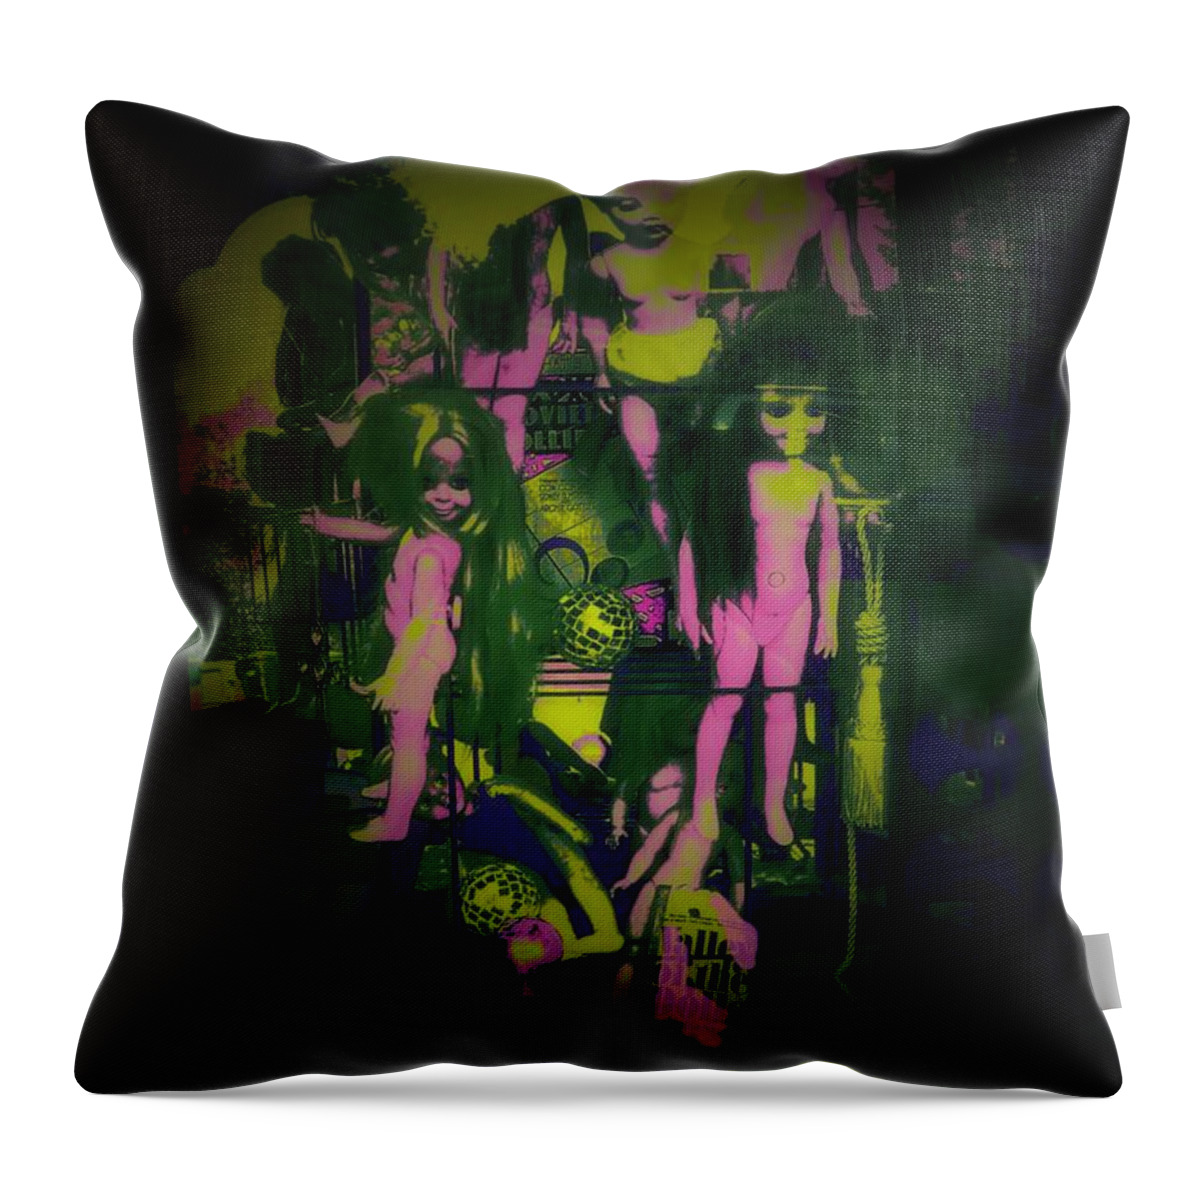 Plastic Dolls Throw Pillow featuring the photograph Suzy's Internalized Brooding by Laureen Murtha Menzl